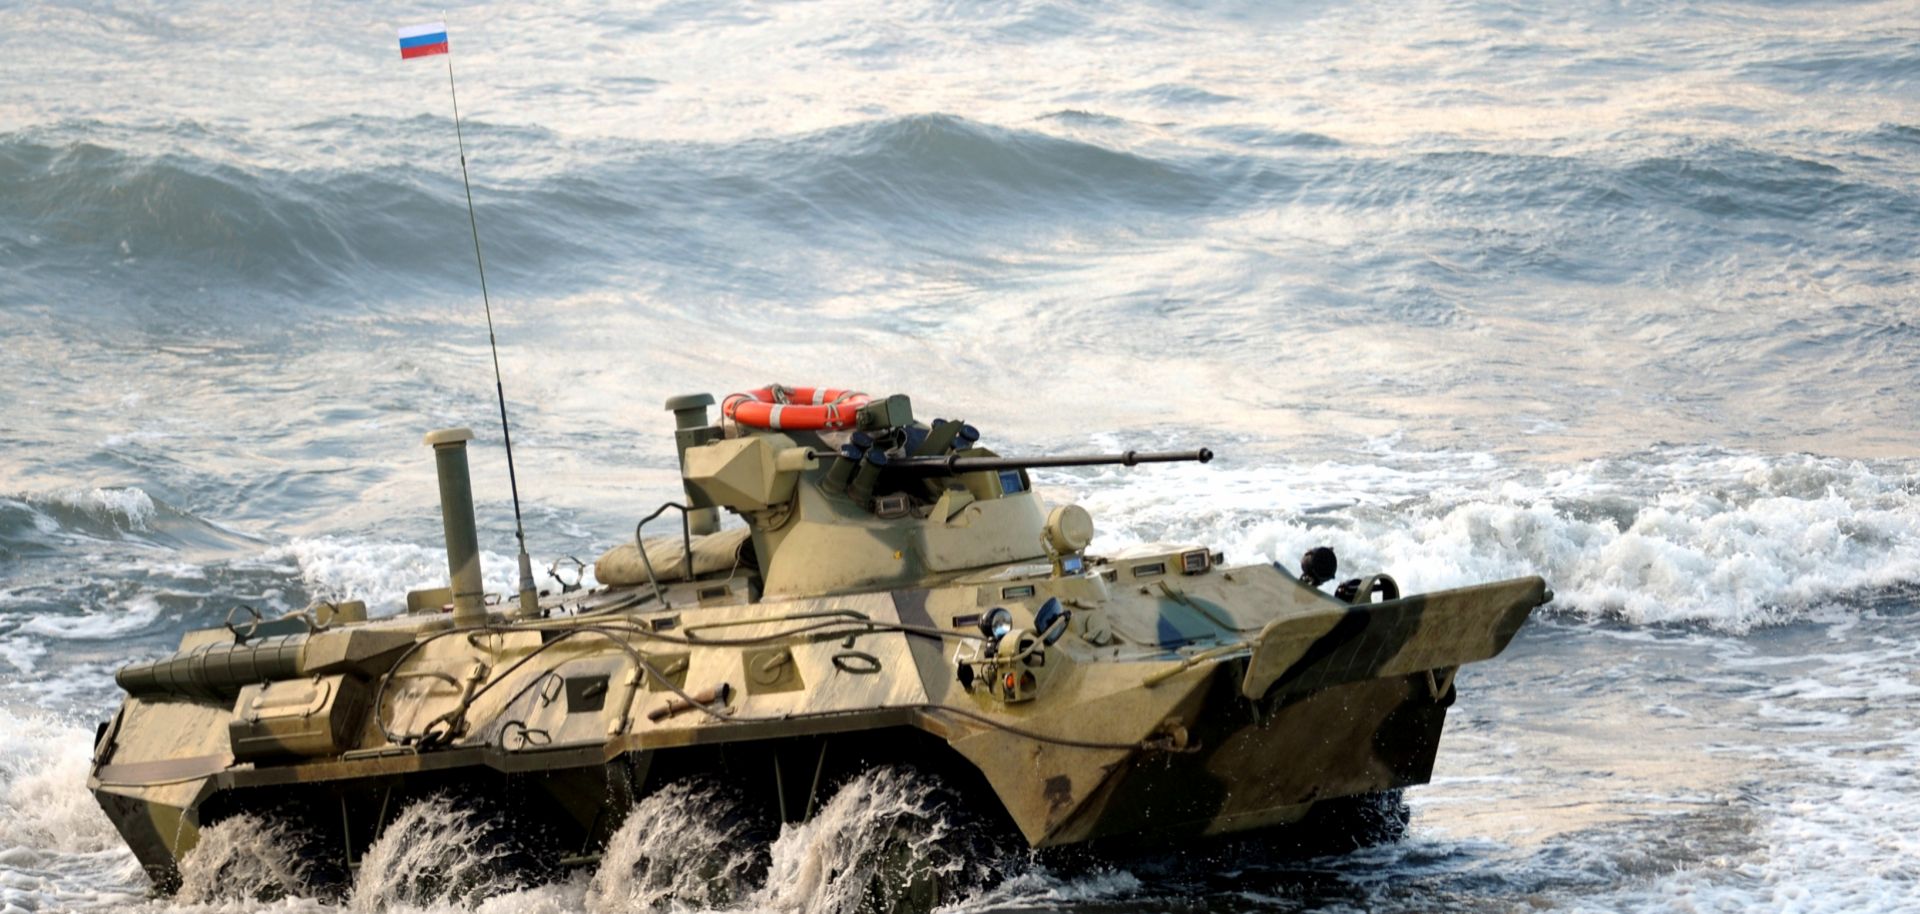 A Russian-built BTR-82A amphibious armored personnel carrier lands on the shore during 2013 joint military exercises with Belarus in the Russia's Kaliningrad enclave.